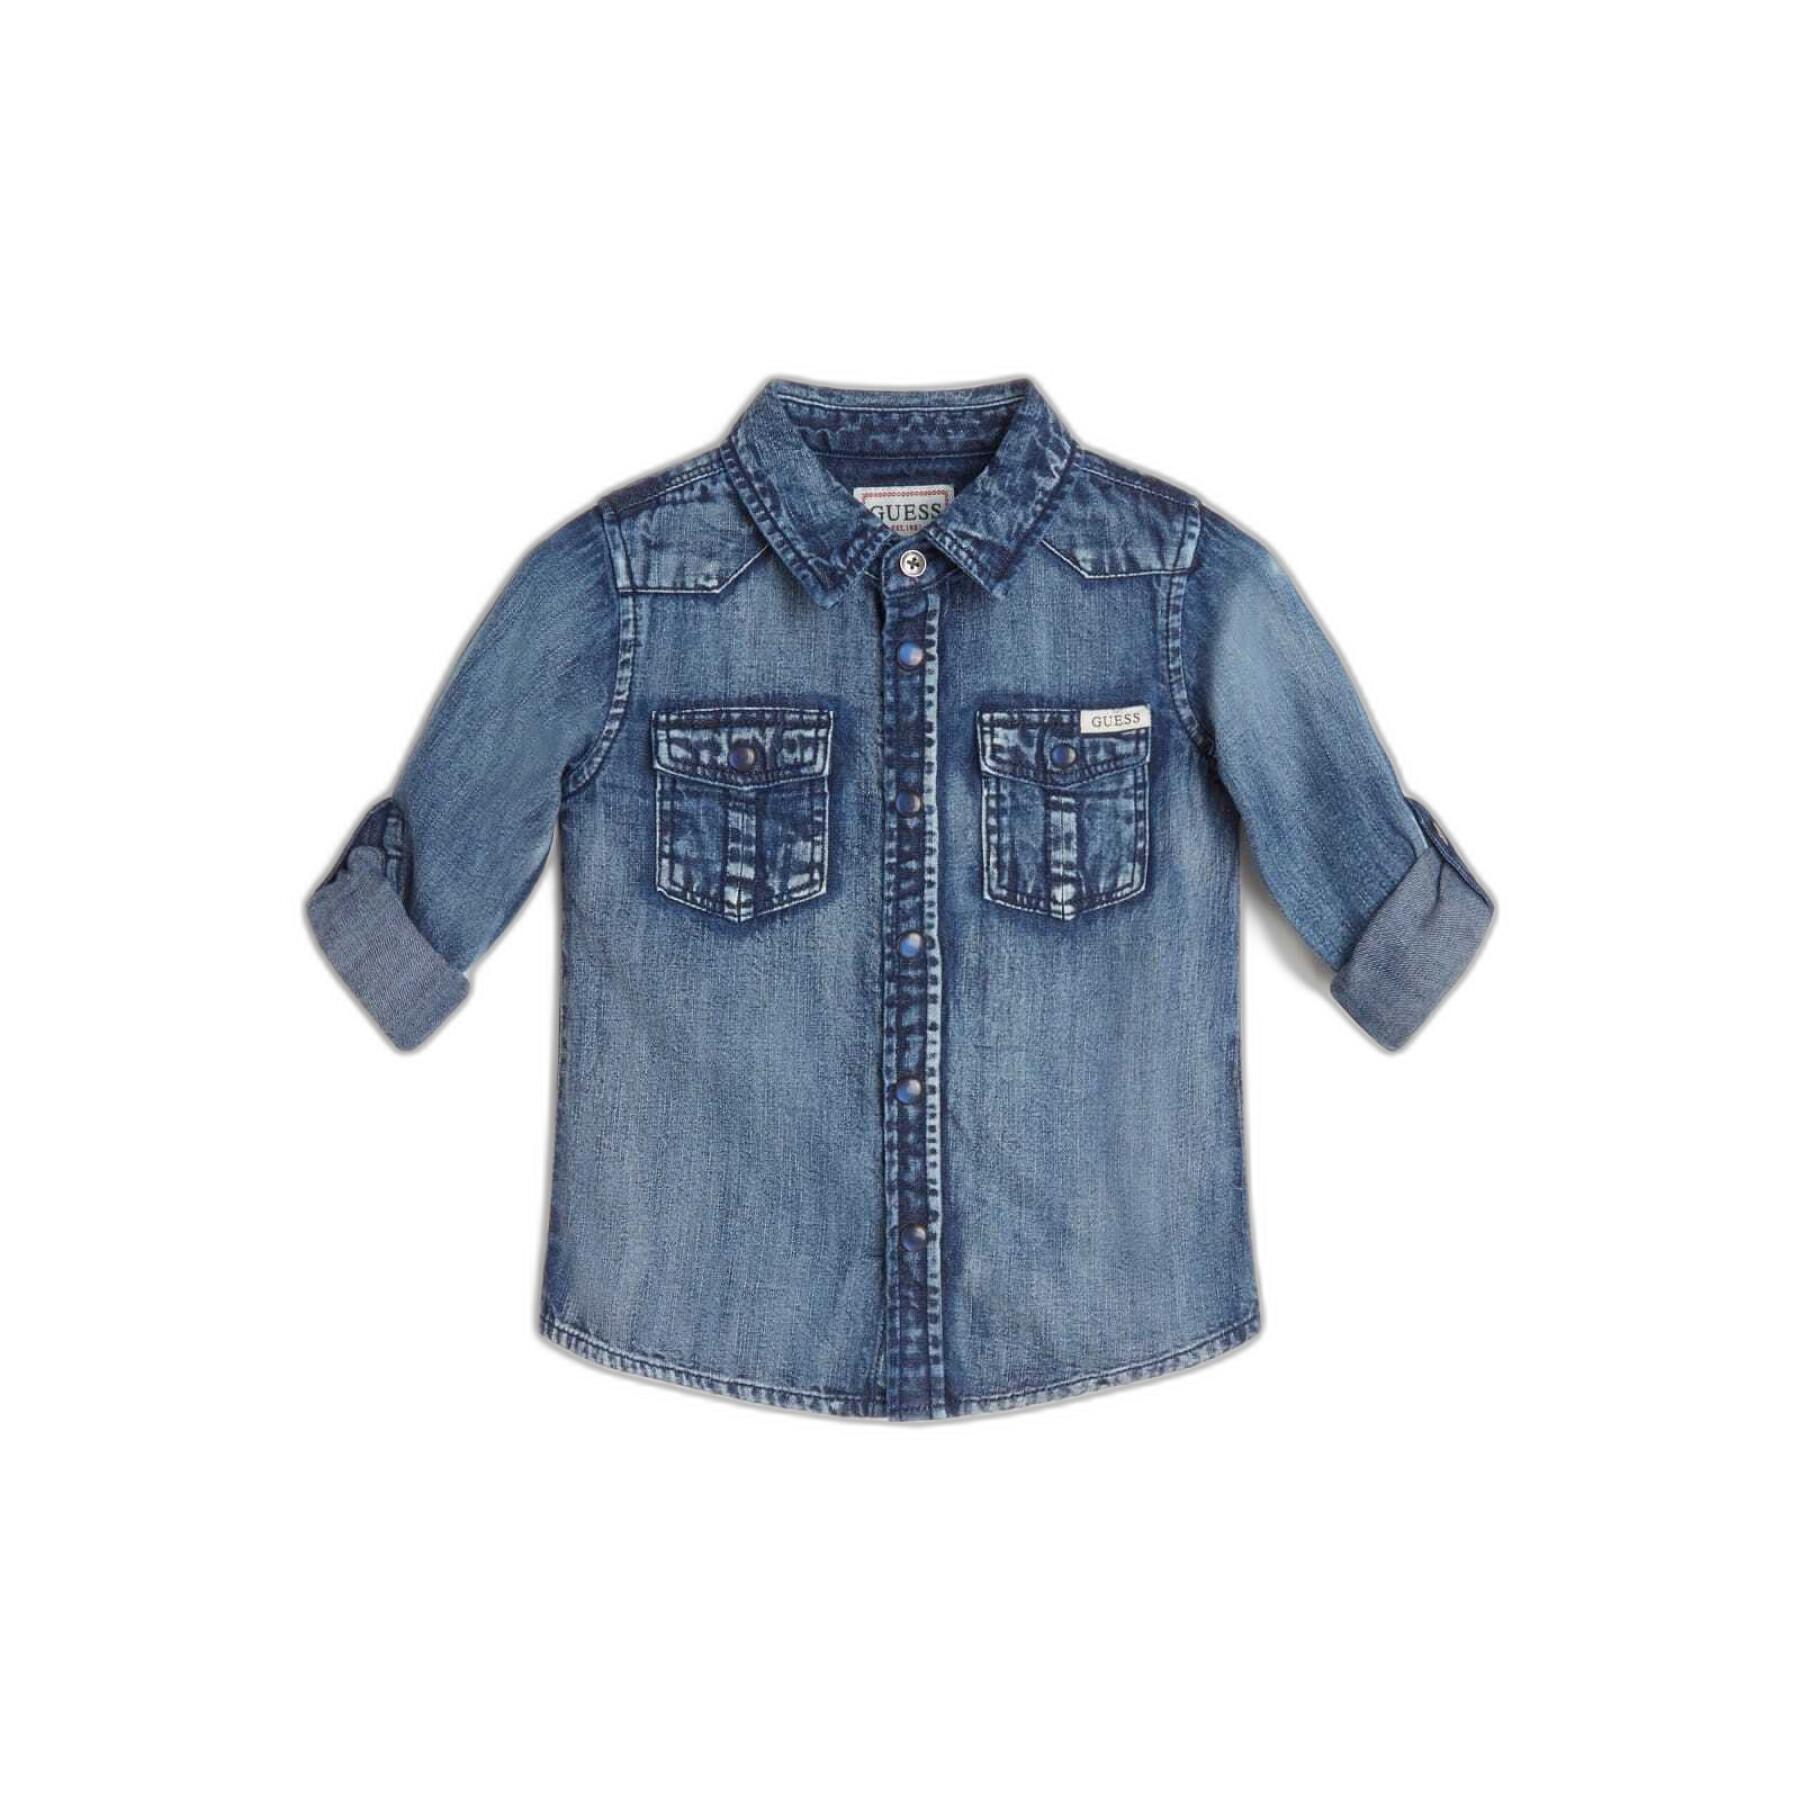 Adjustable jeans shirt for kids Guess